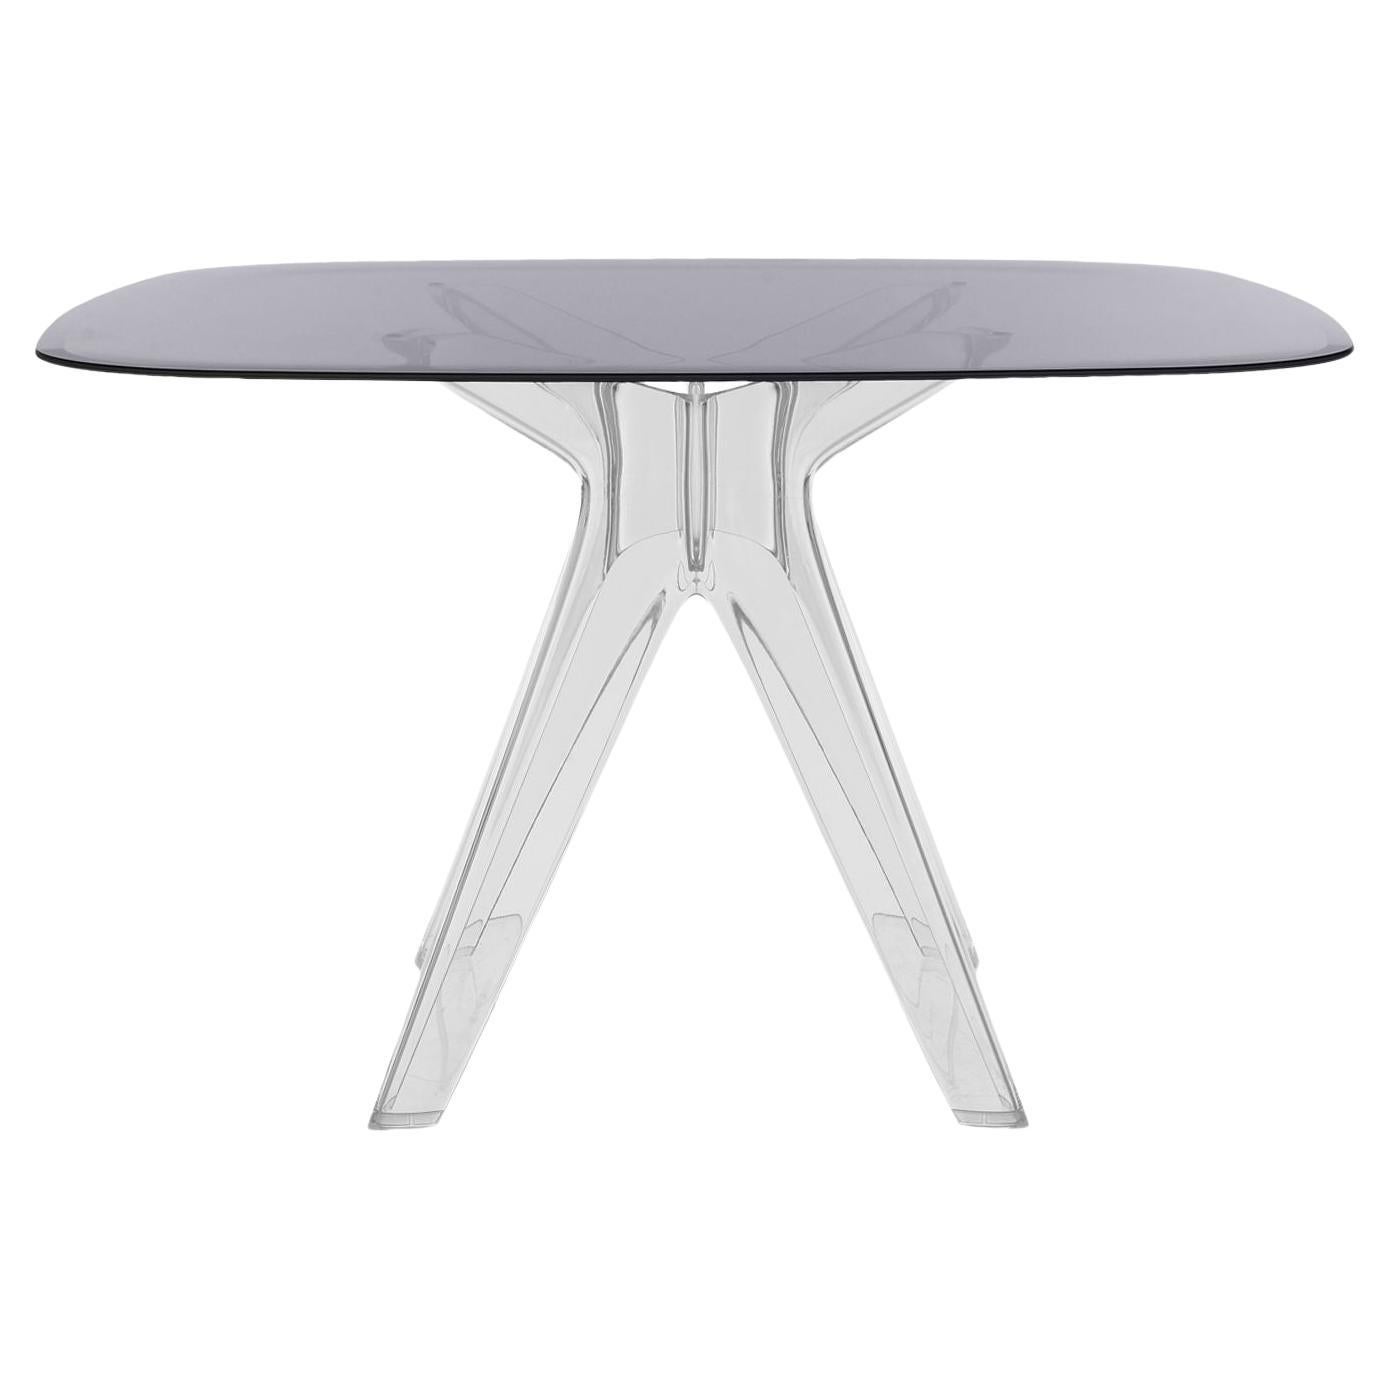 Kartell Sir Gio Square Coffee Table with Smoke Top by Philippe Starck